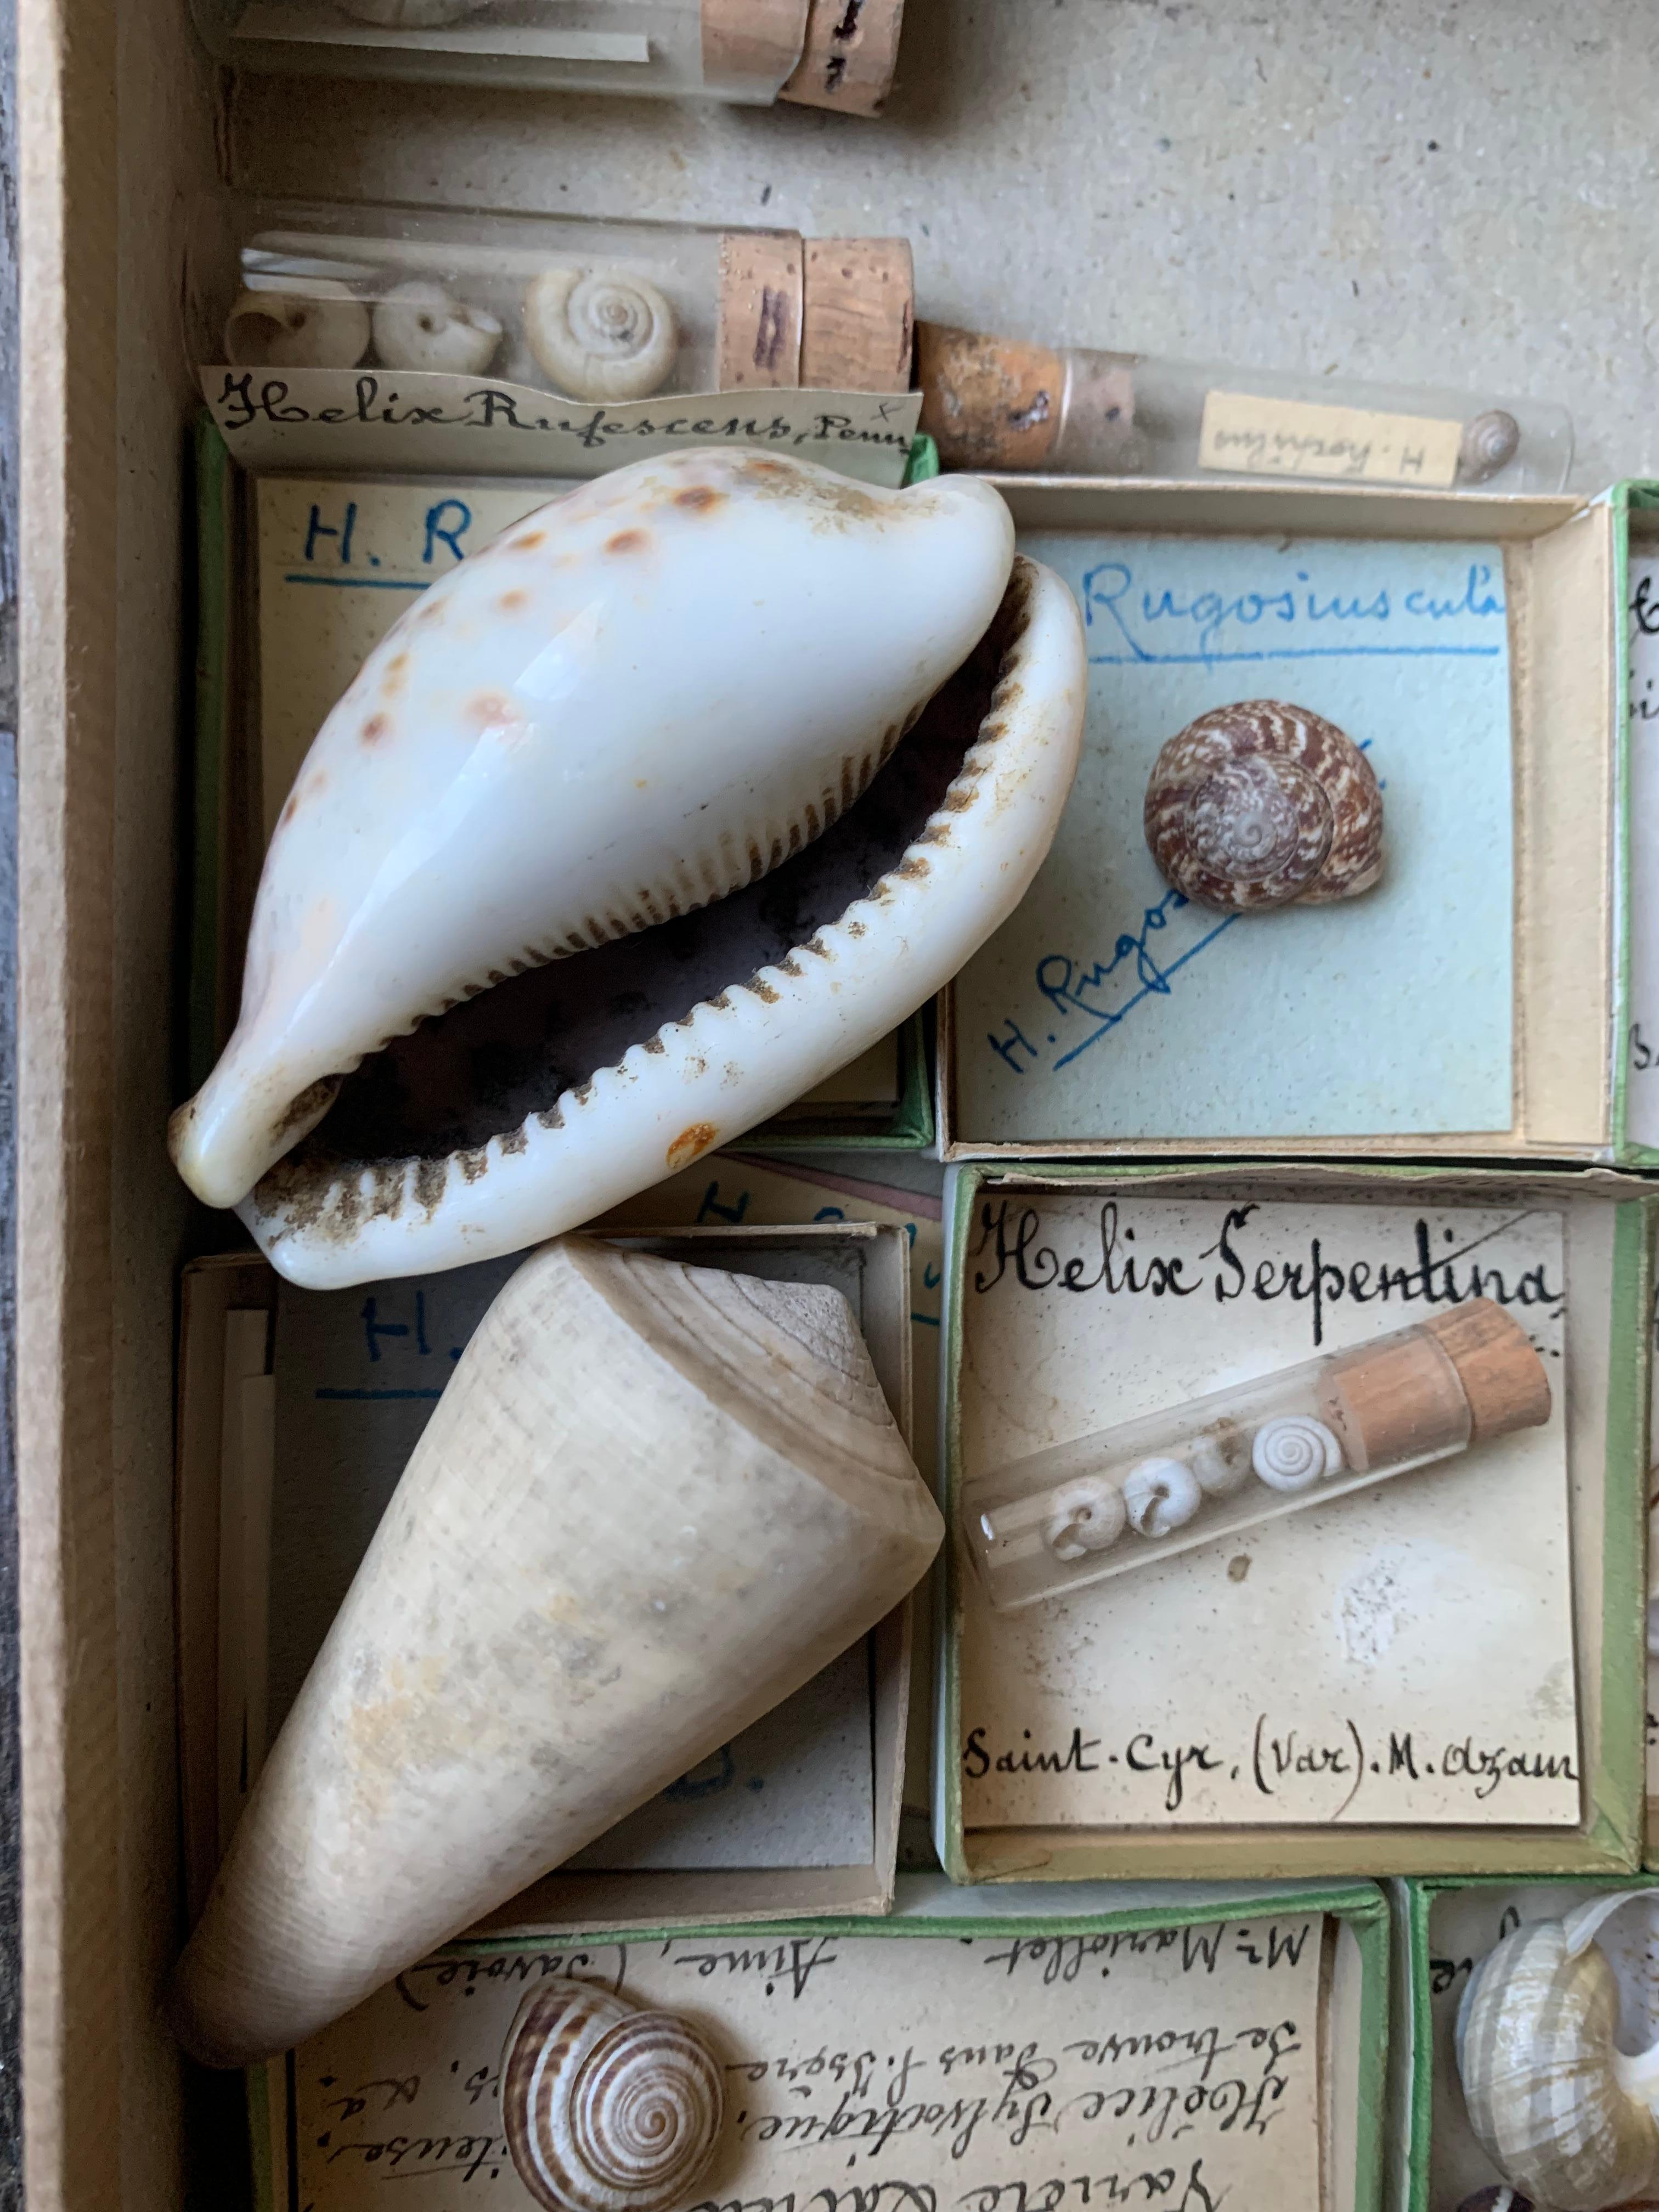 Very interesting set of shells collected by an amateur between the end of the 19th century and the beginning of the 20th century. The shells are classified by size and age either in small cardboard boxes or in glass tubes closed with corks. Labels